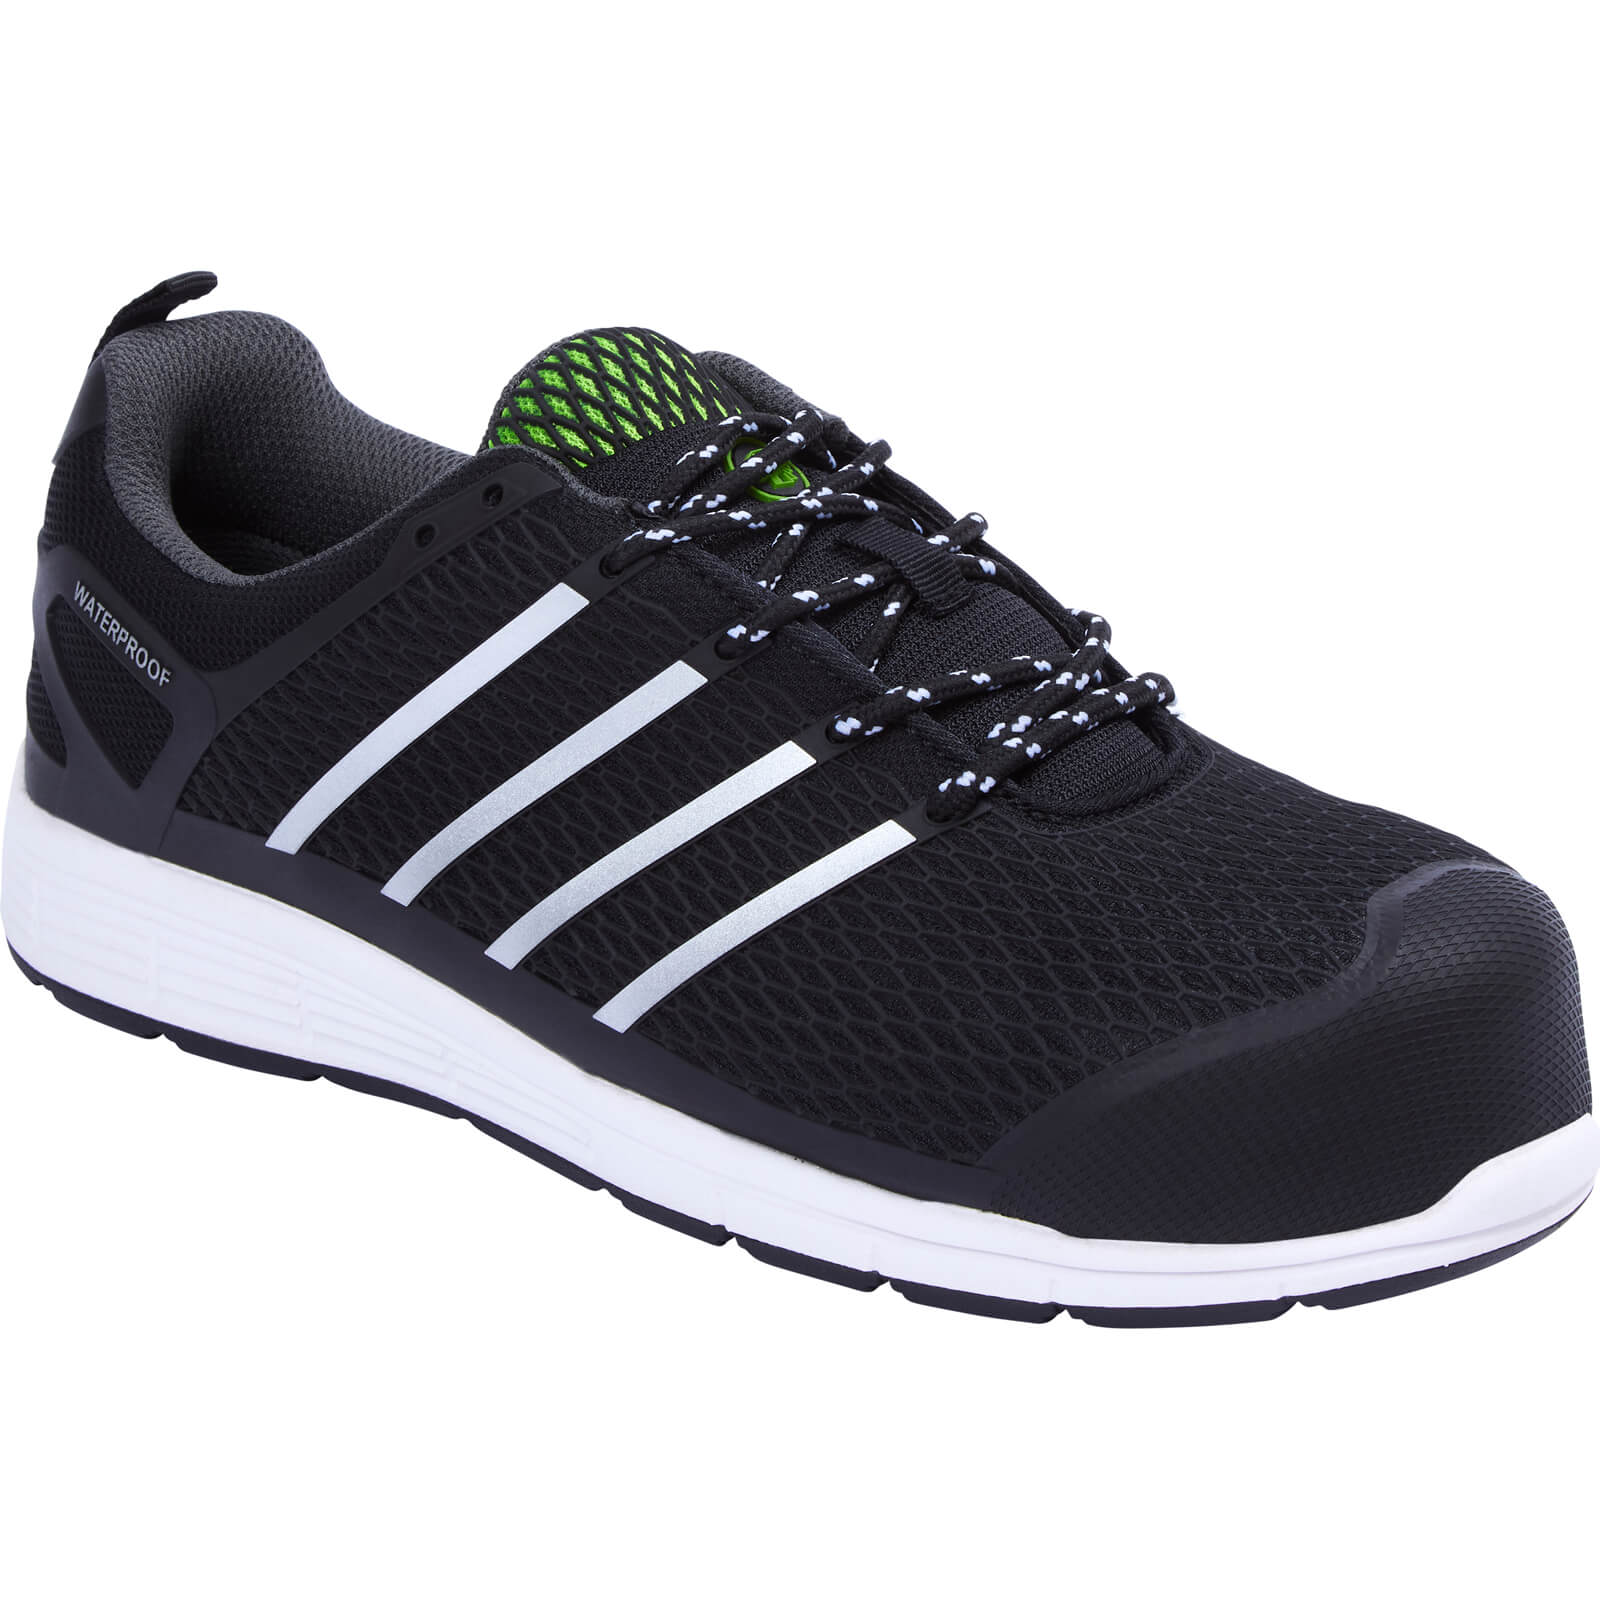 Apache Motion WR Waterproof Sports Safety Trainers Black Size 7